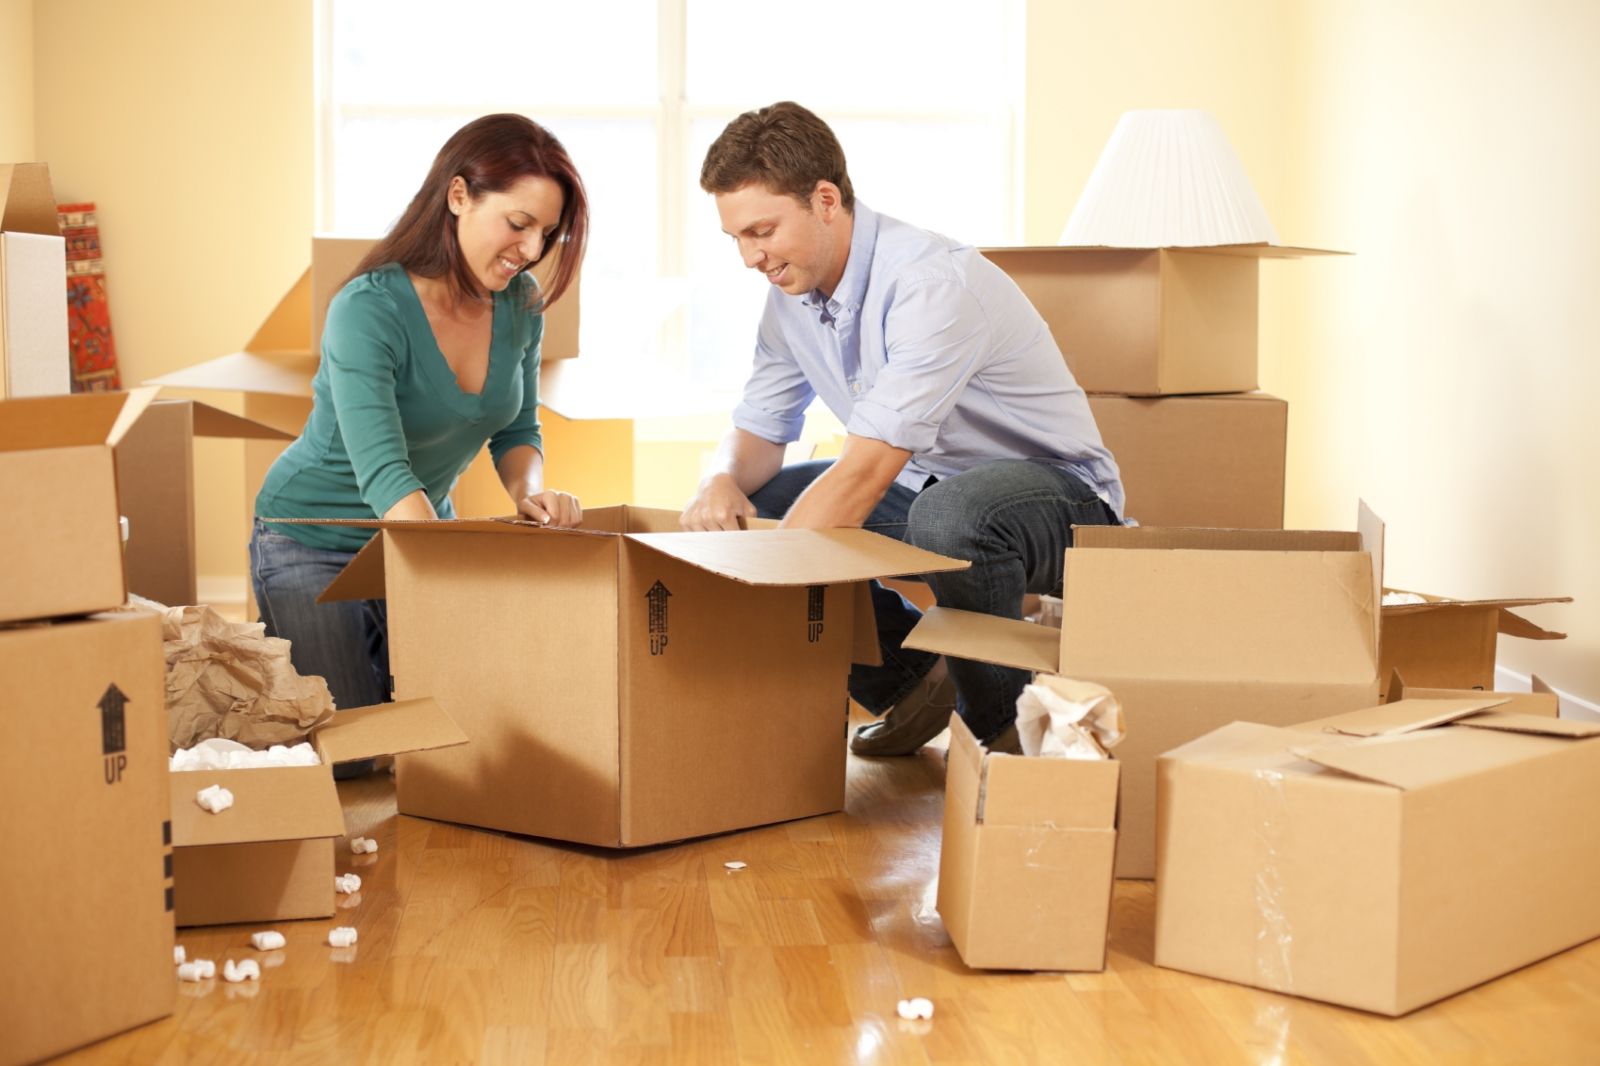 Four Simple Ways to Reduce Moving Costs